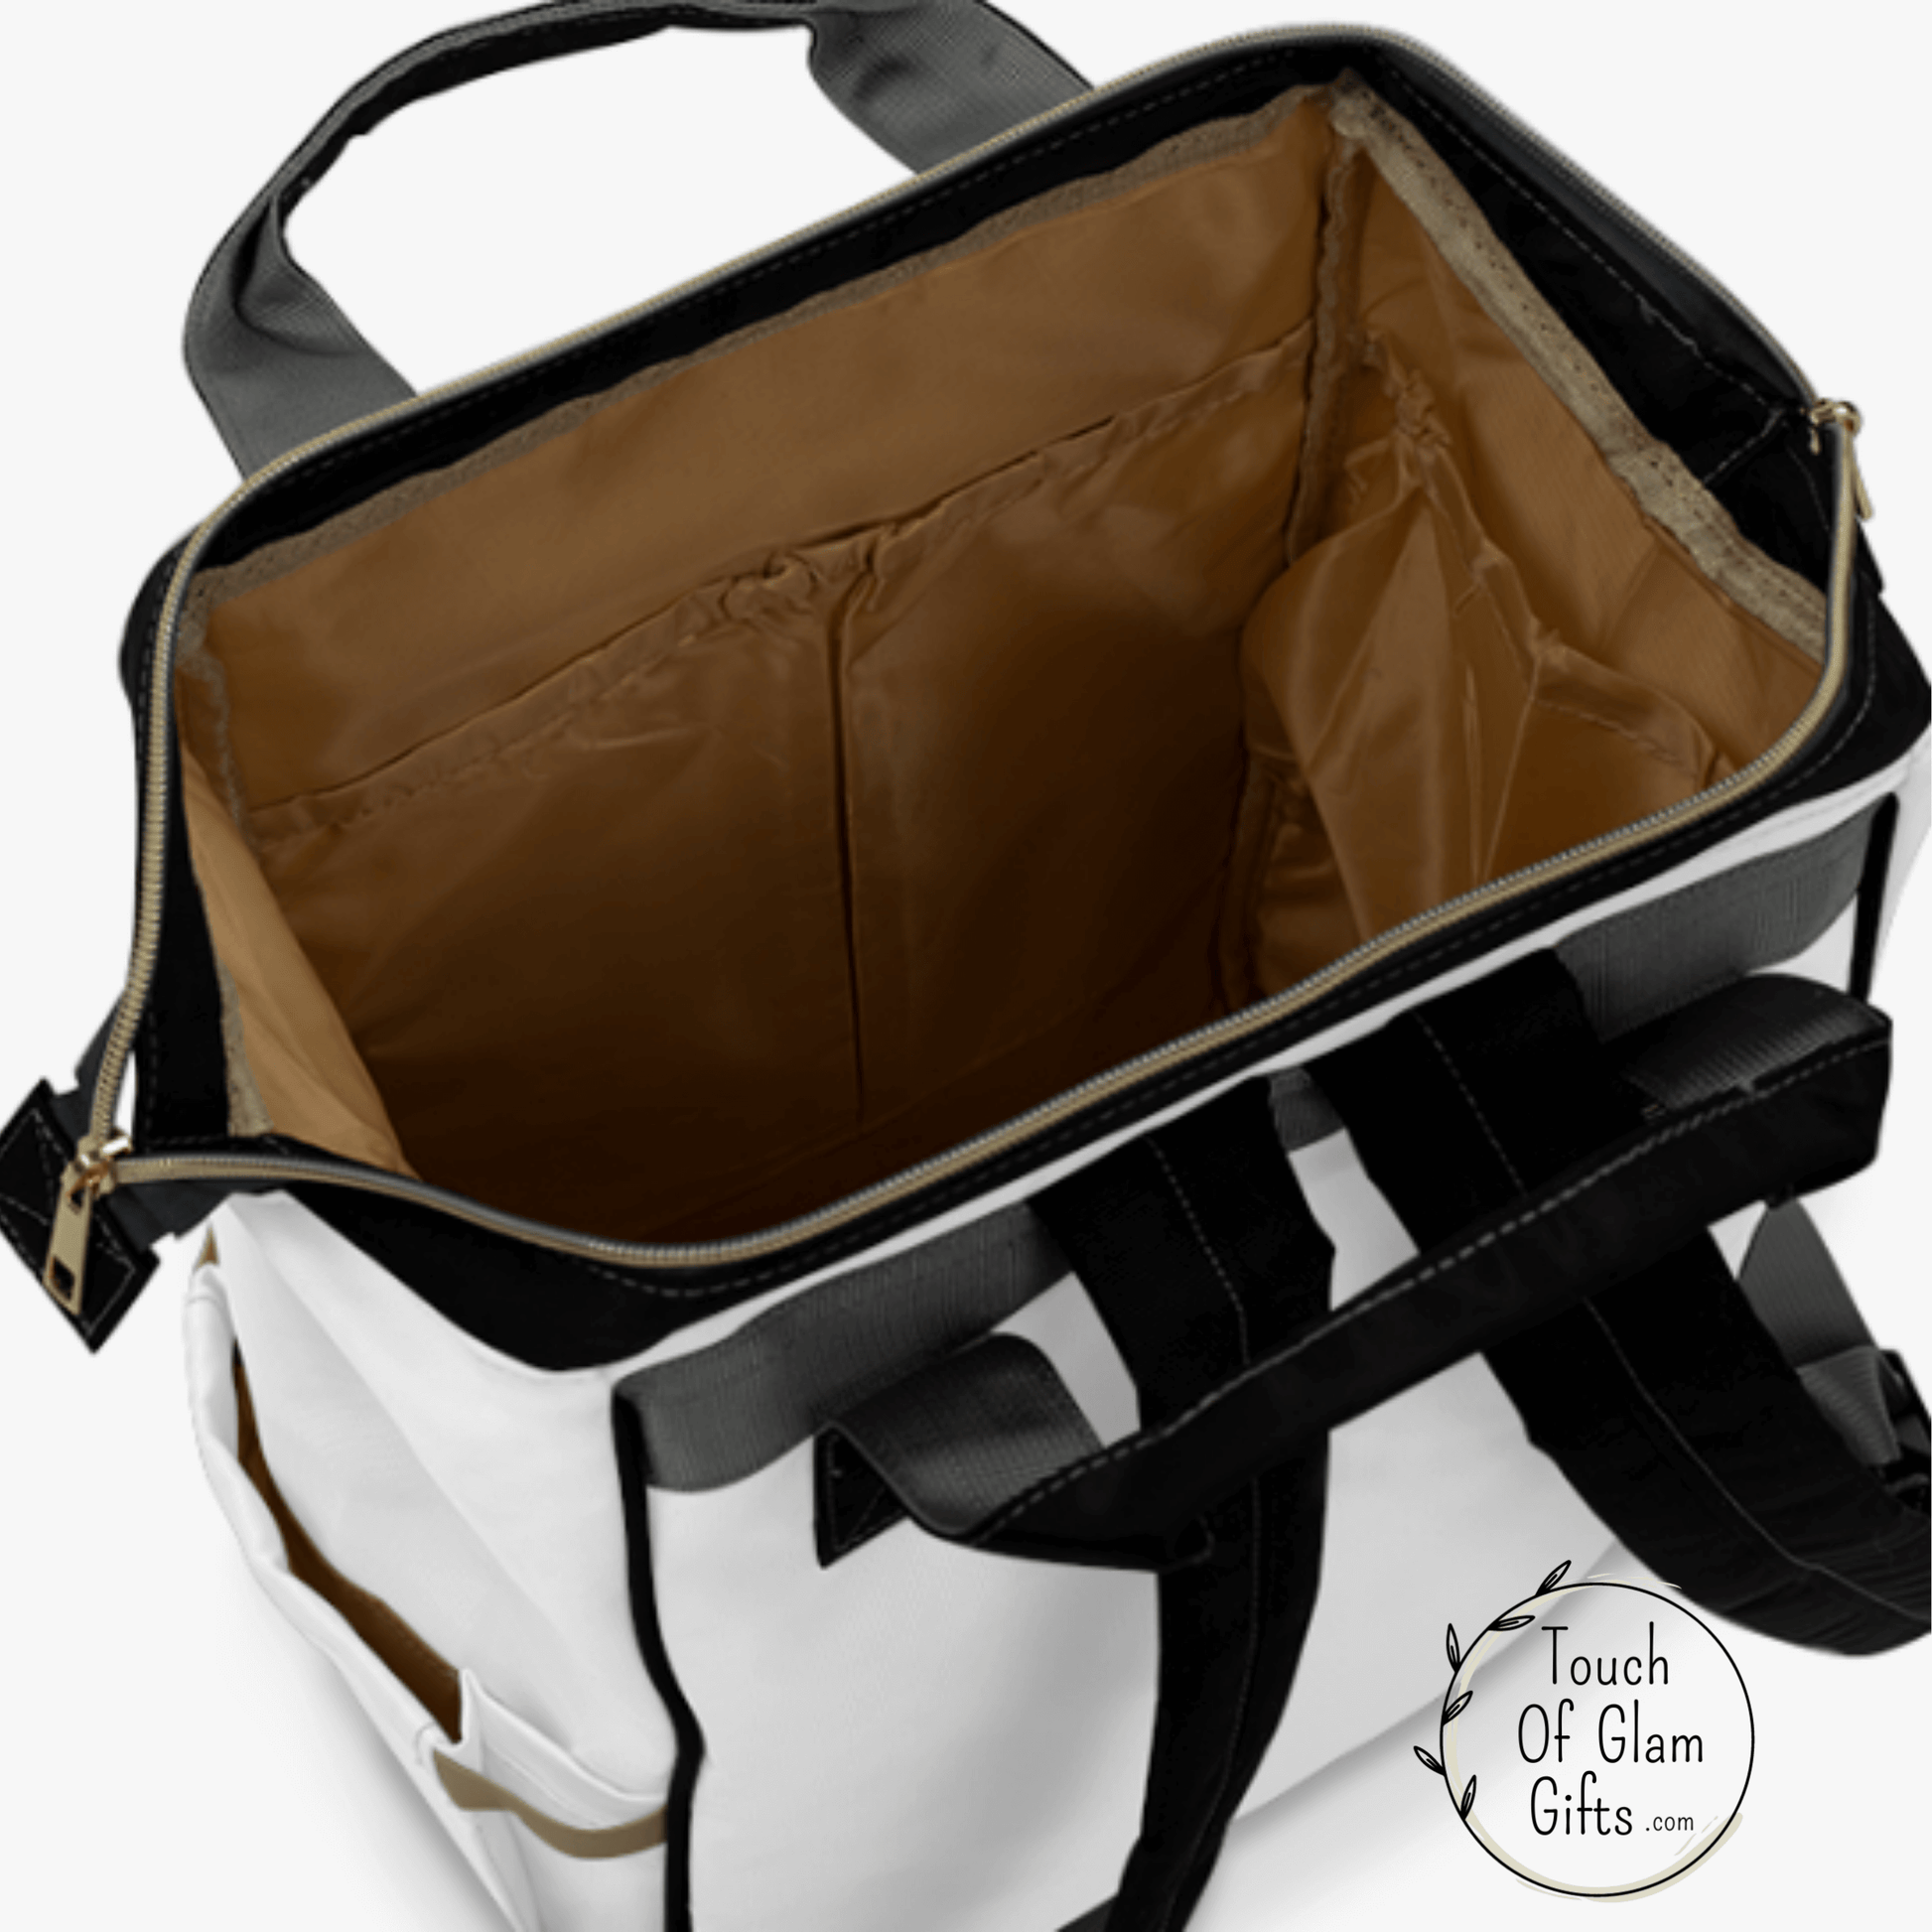 The diaper bag backpack is shown standing up on its own when the main zippered compartment is open The inside is tan color in a washable polyester material and has multiple storage pockets to keep everything organized inside the dad bag.